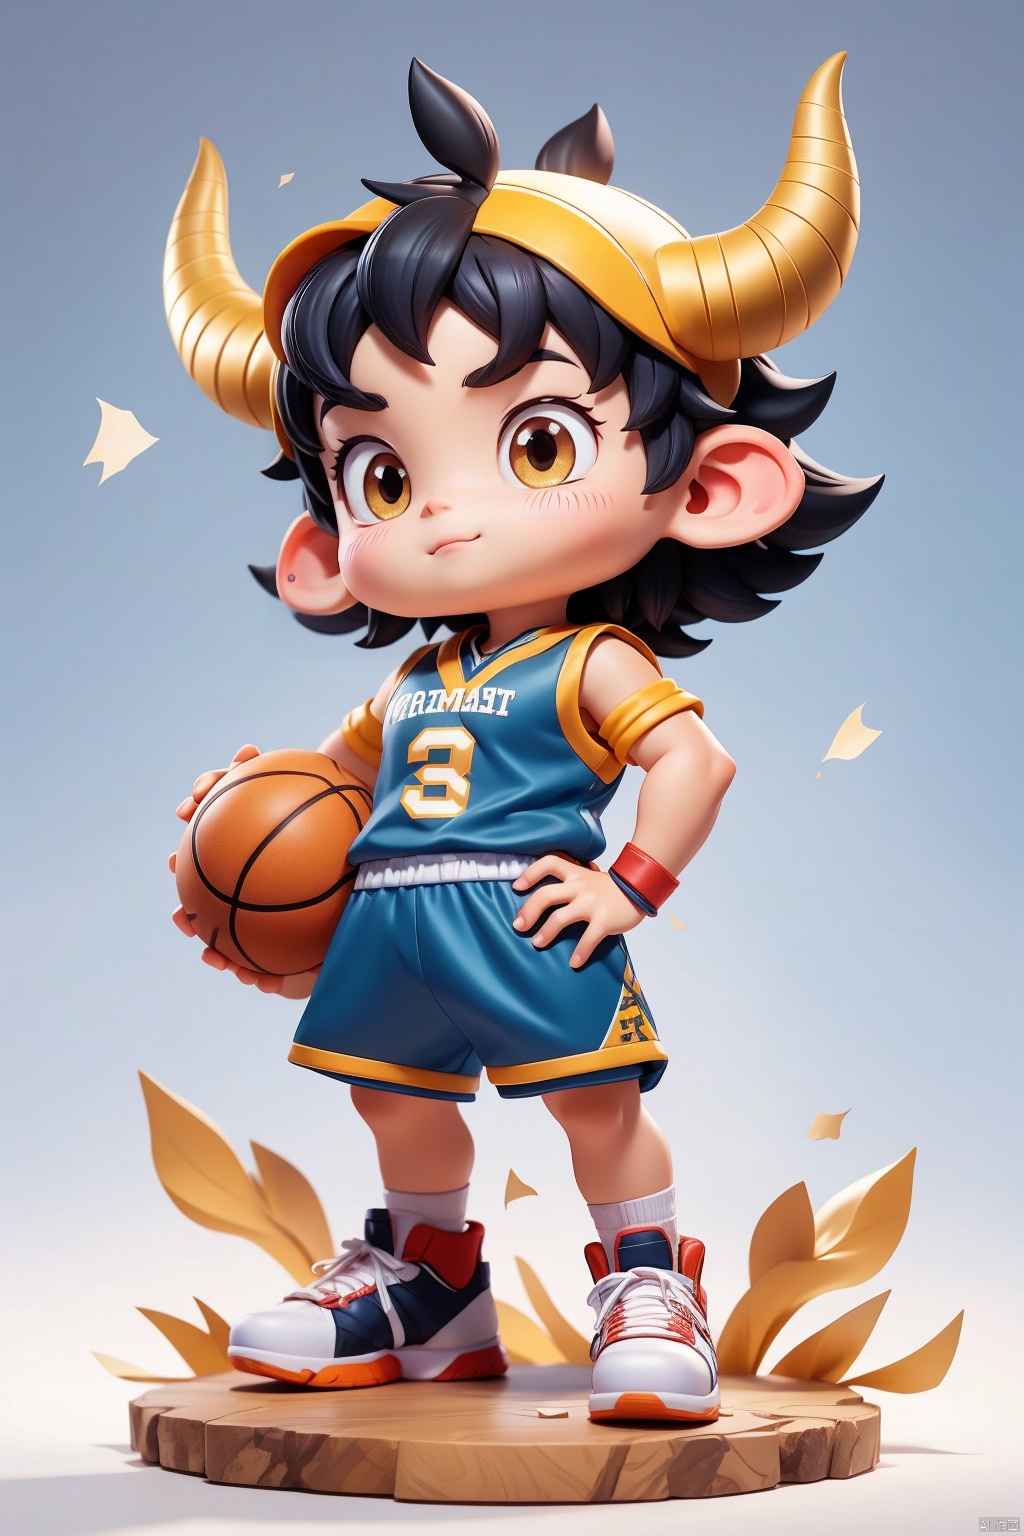 1 male, animal IP, solo, (Q version :1.2), determined expression, focused gaze, horns, blush, basketball uniform, athlete body, simple white background,